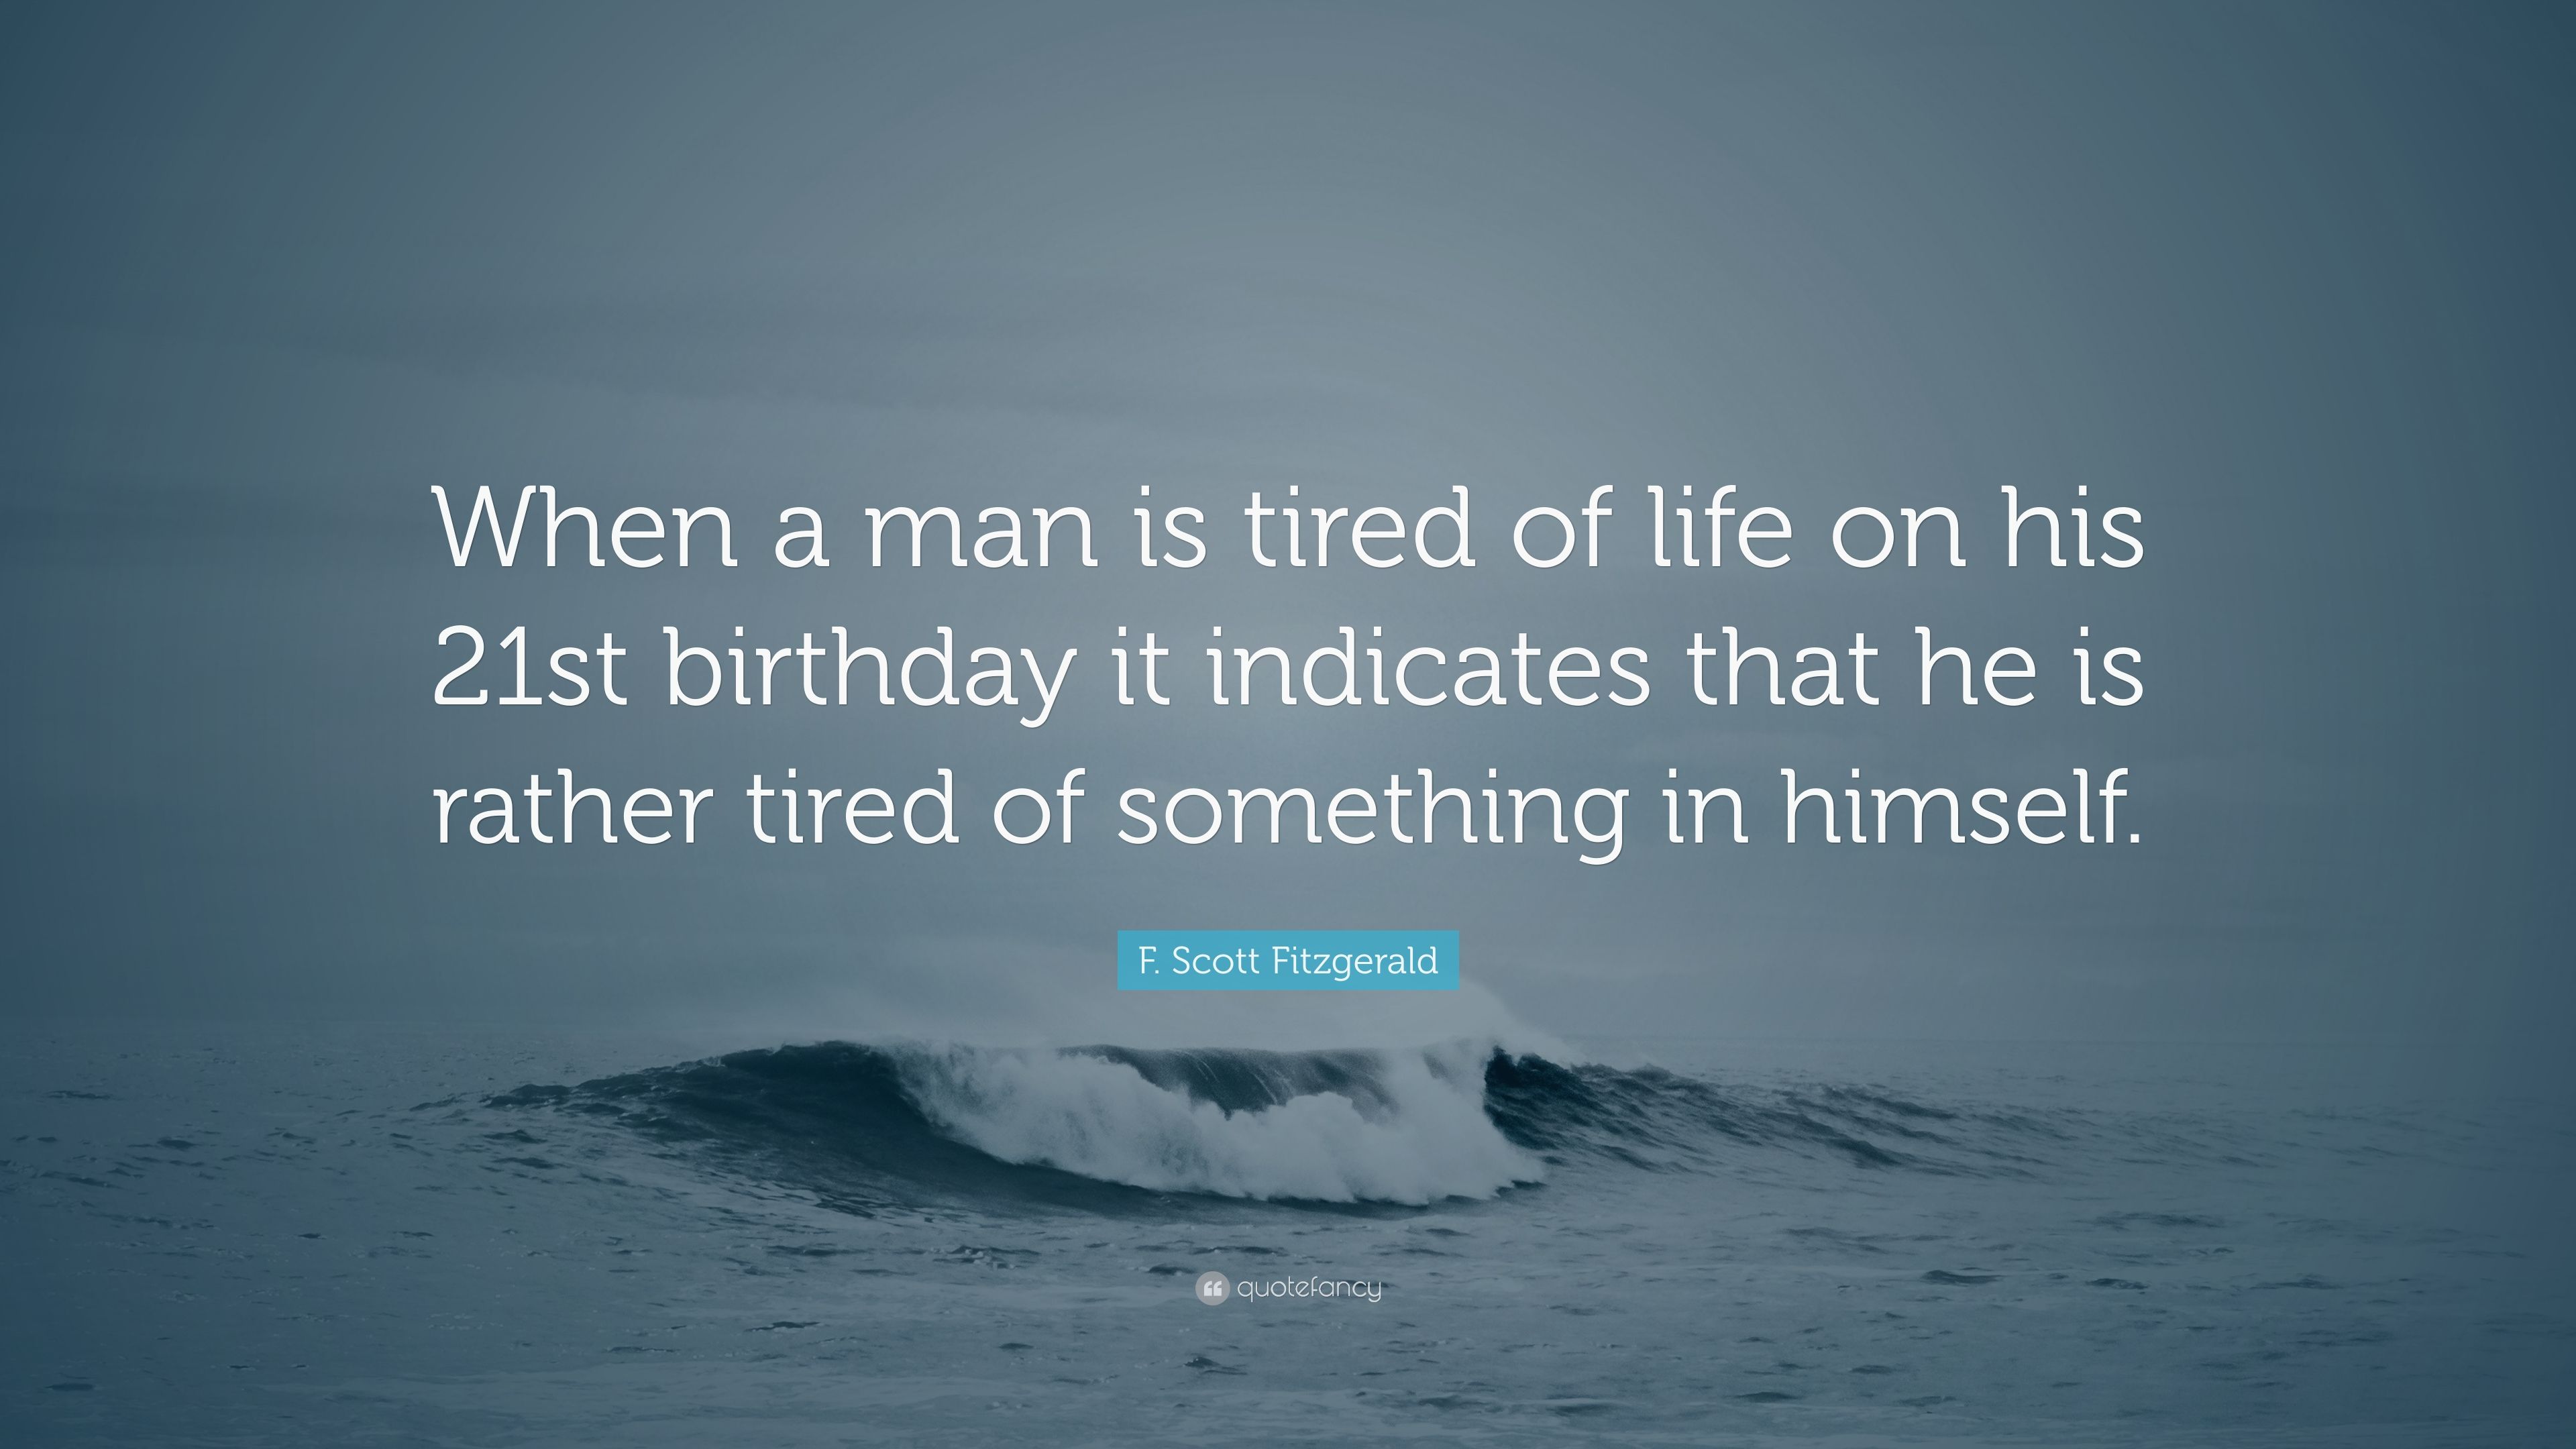 F. Scott Fitzgerald Quote: "When a man is tired of life on his 21st bi...